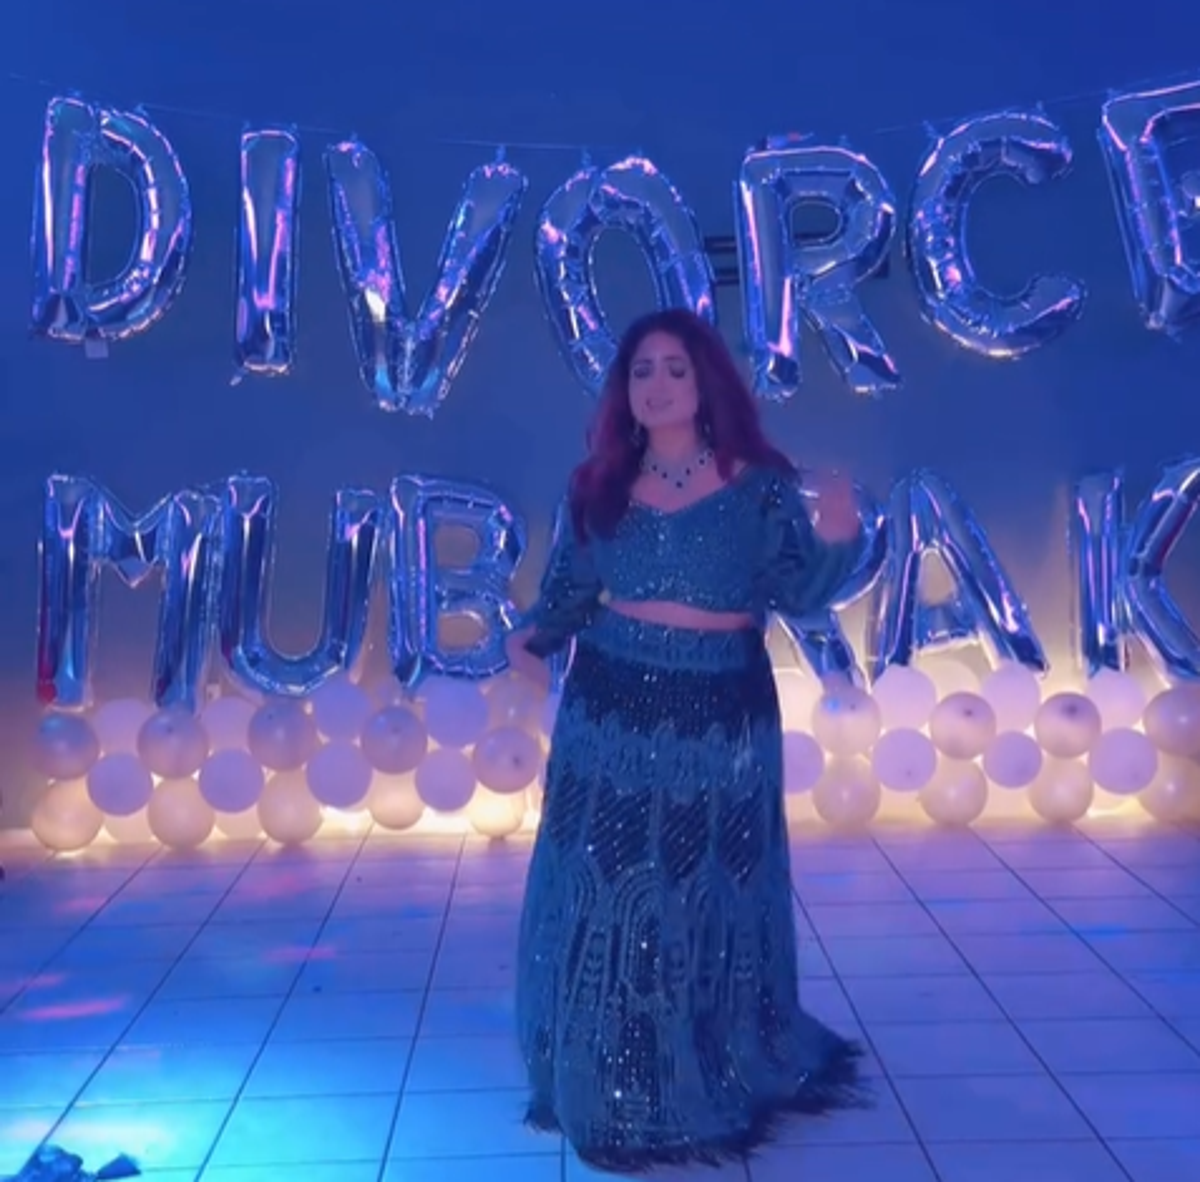 Woman’s viral ‘happy divorce’ party sparks debate on taboo topic across South Asia